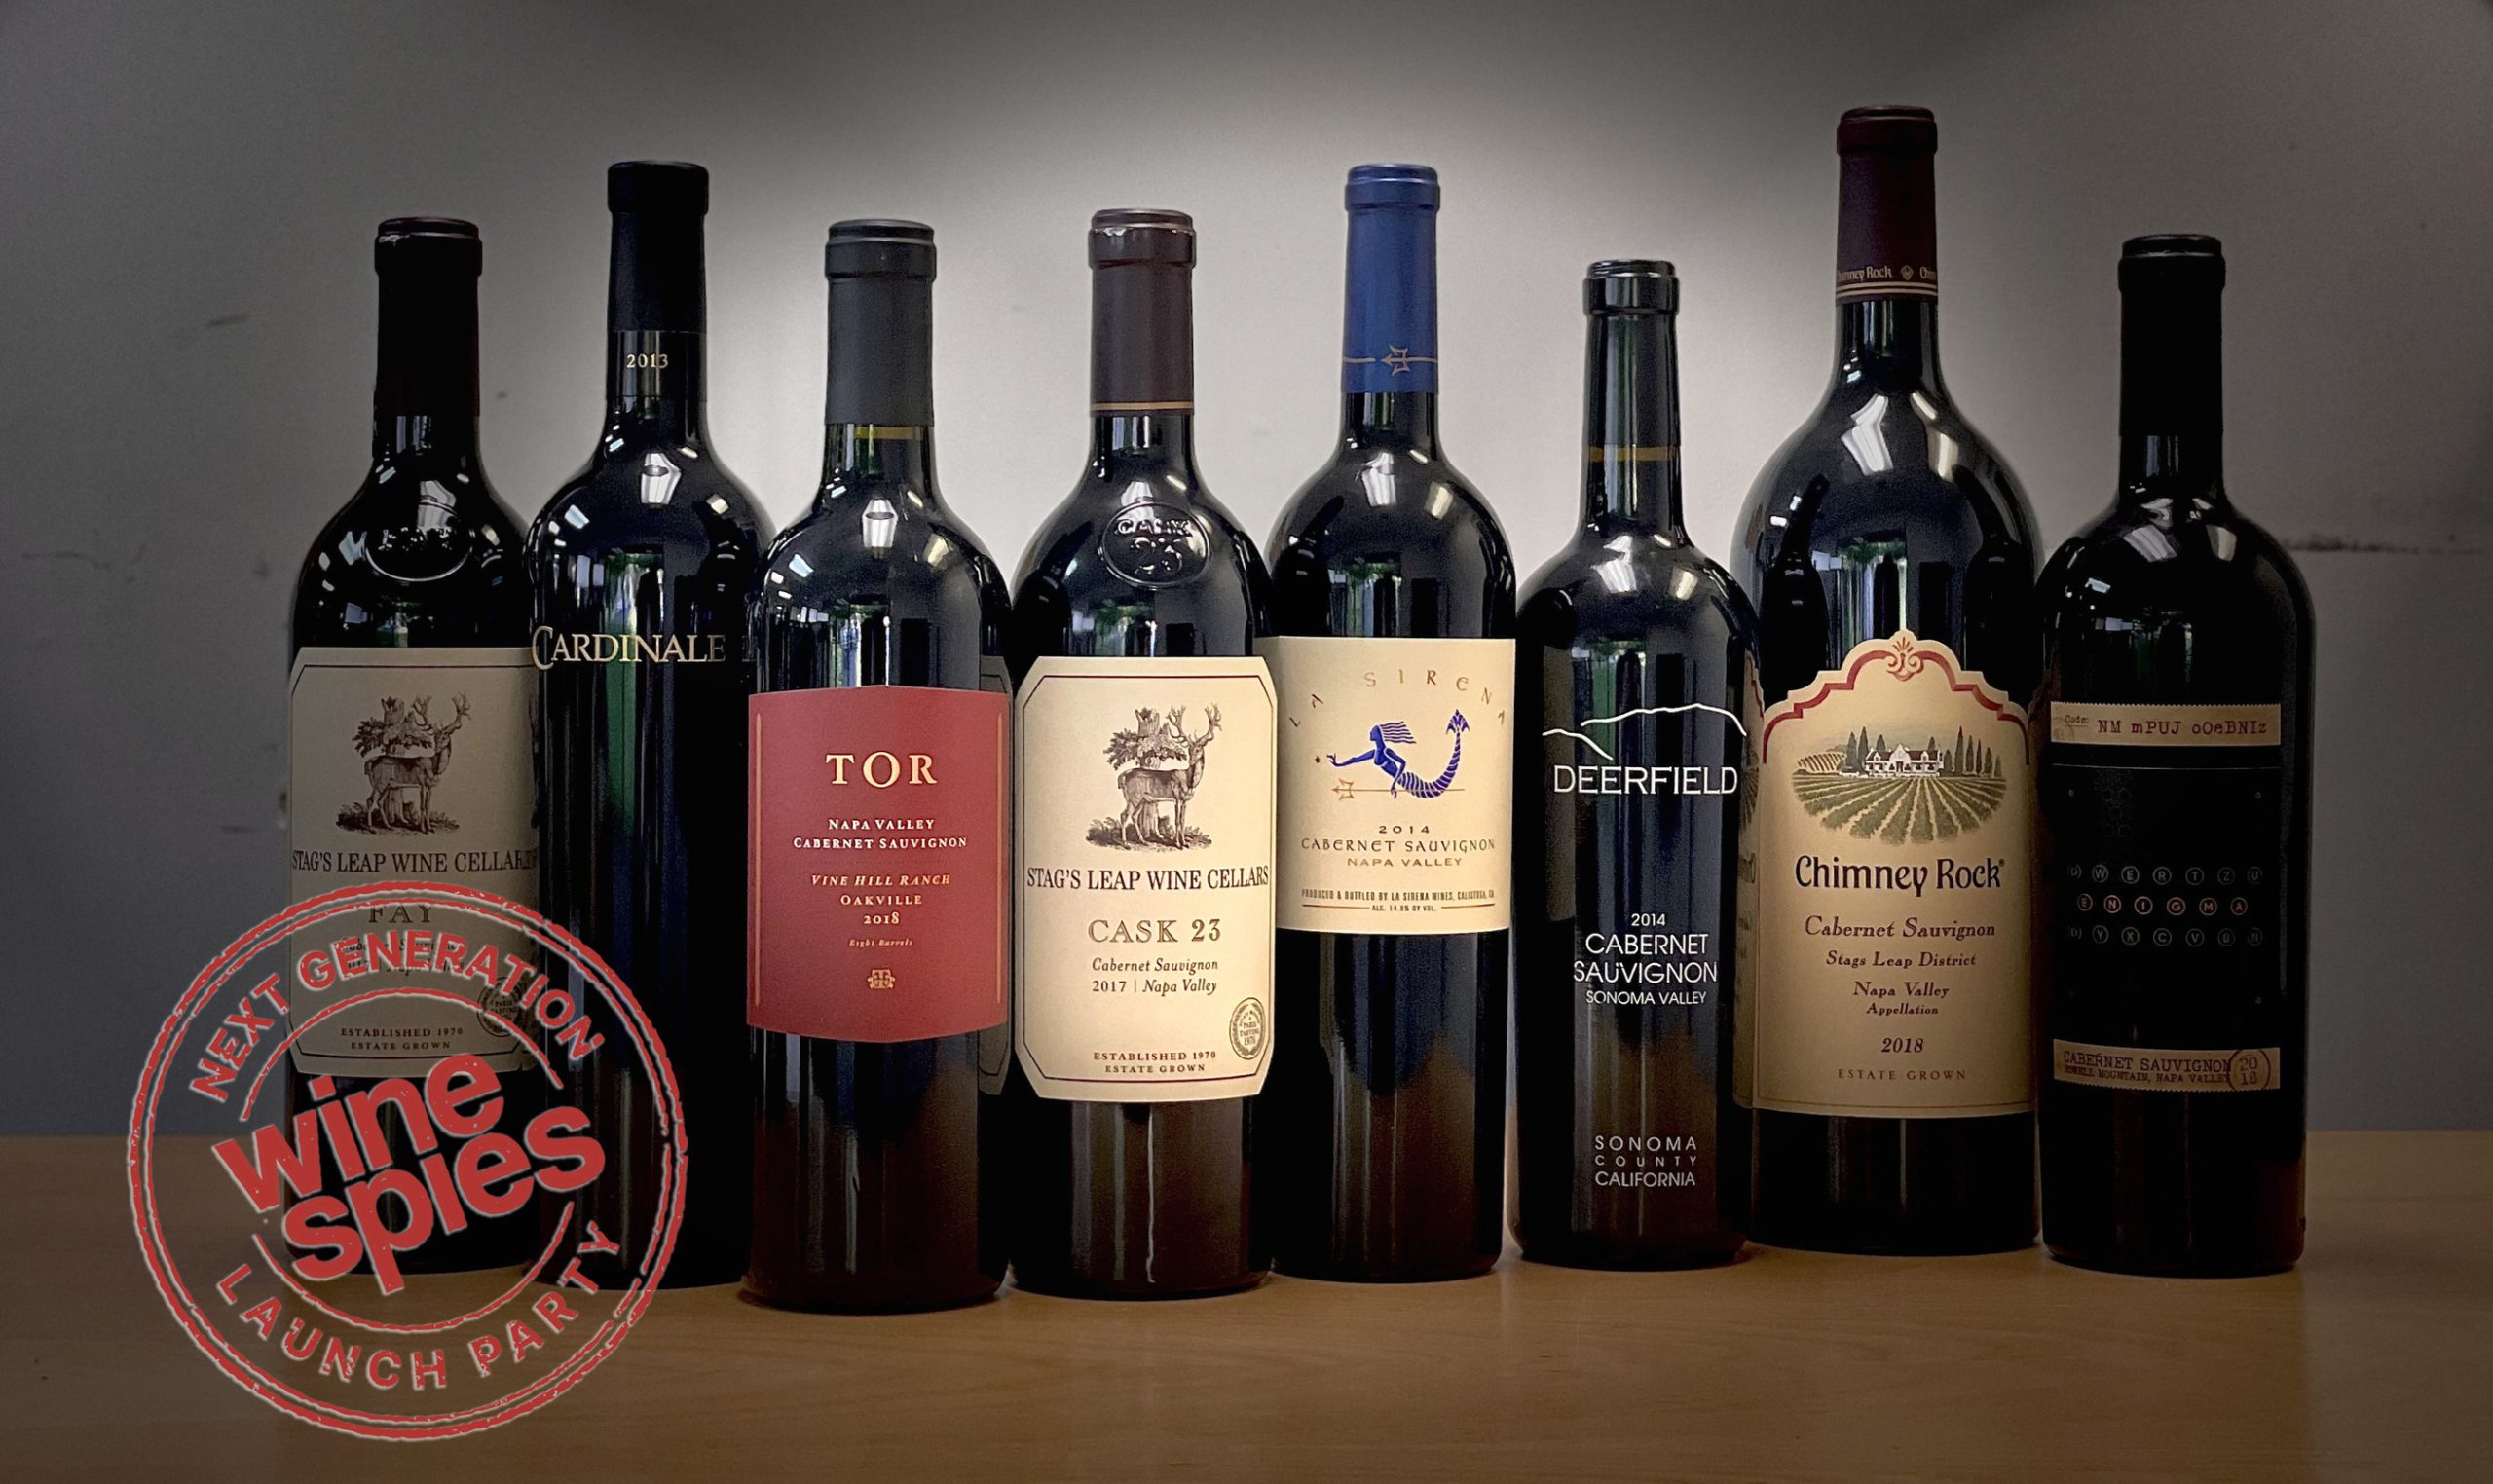 Wine Spies' Cellar Stocker event includes over two dozen wines, from cult Napa Cabs to first growth Bordeaux and everyday values - at the world's lowest prices.